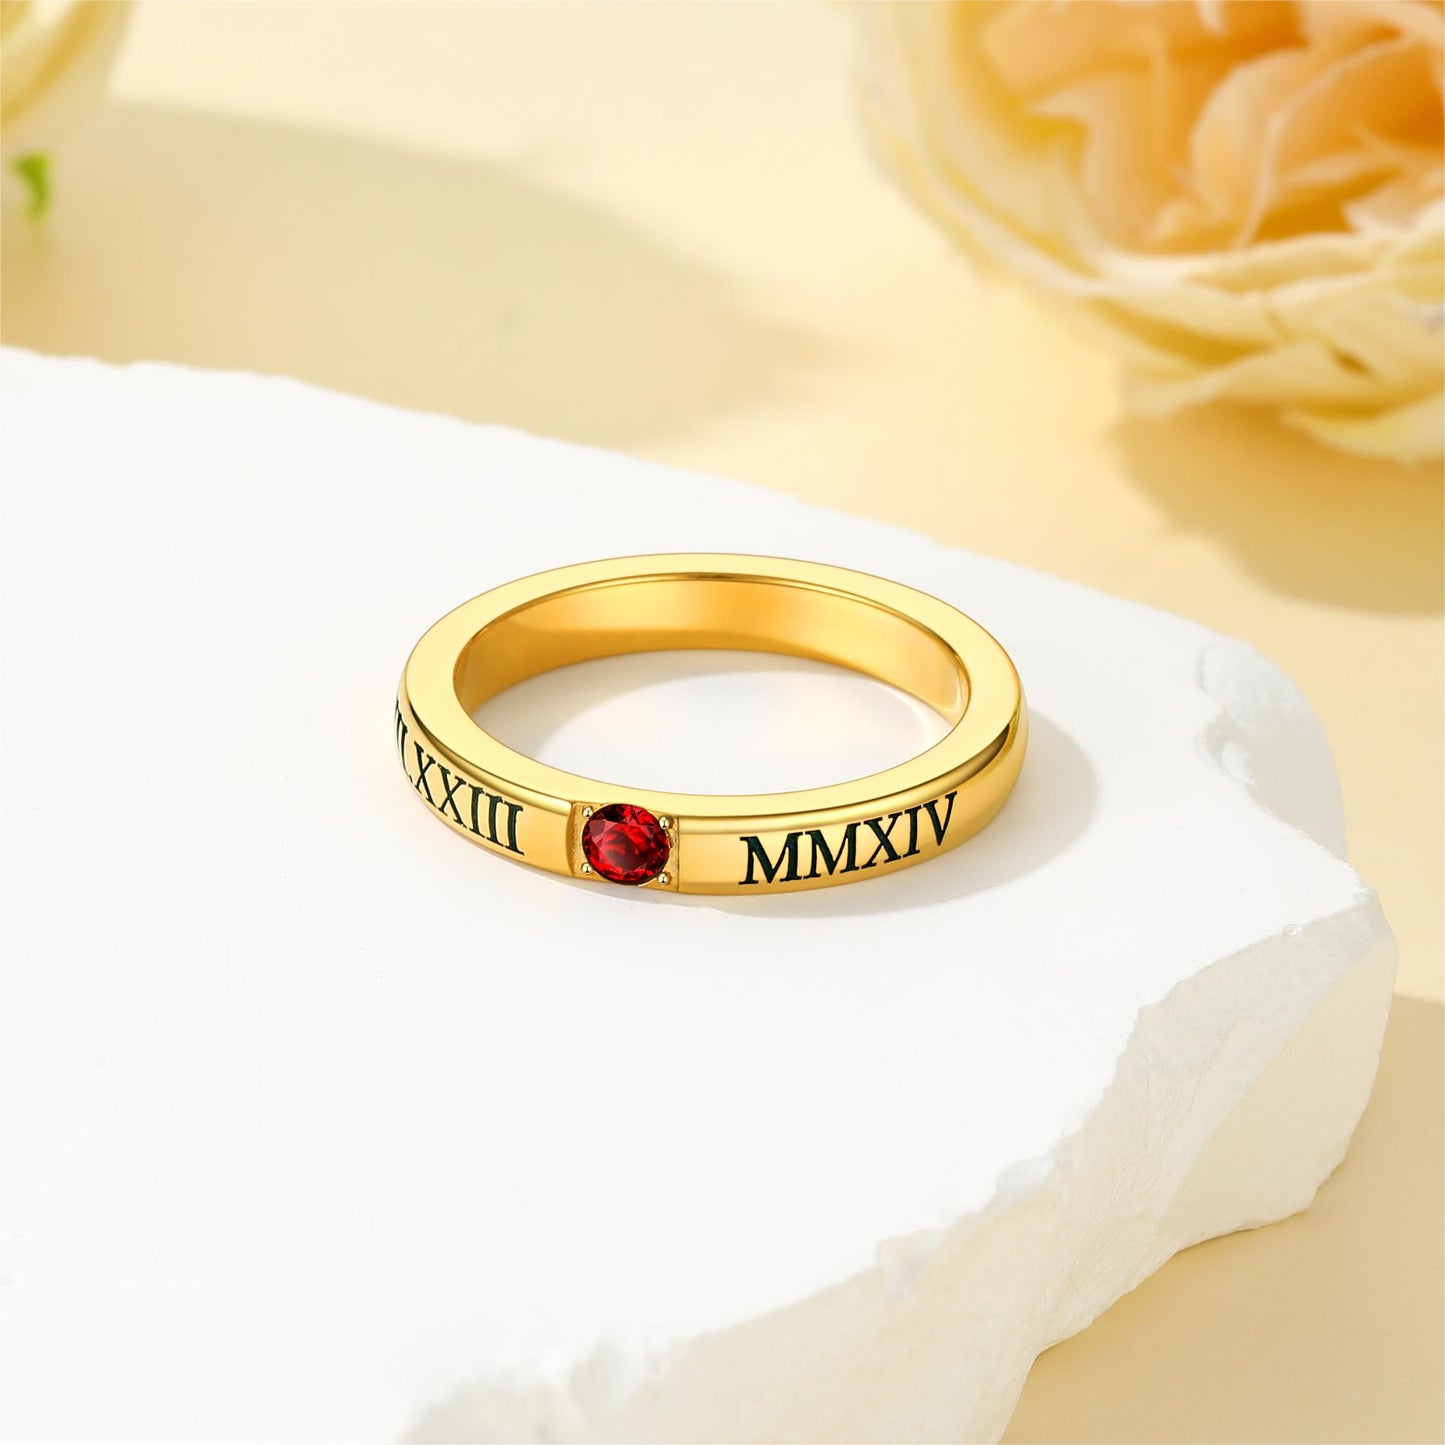 Birthstonesjewelry Personalized Roman Numerals Rings Gold